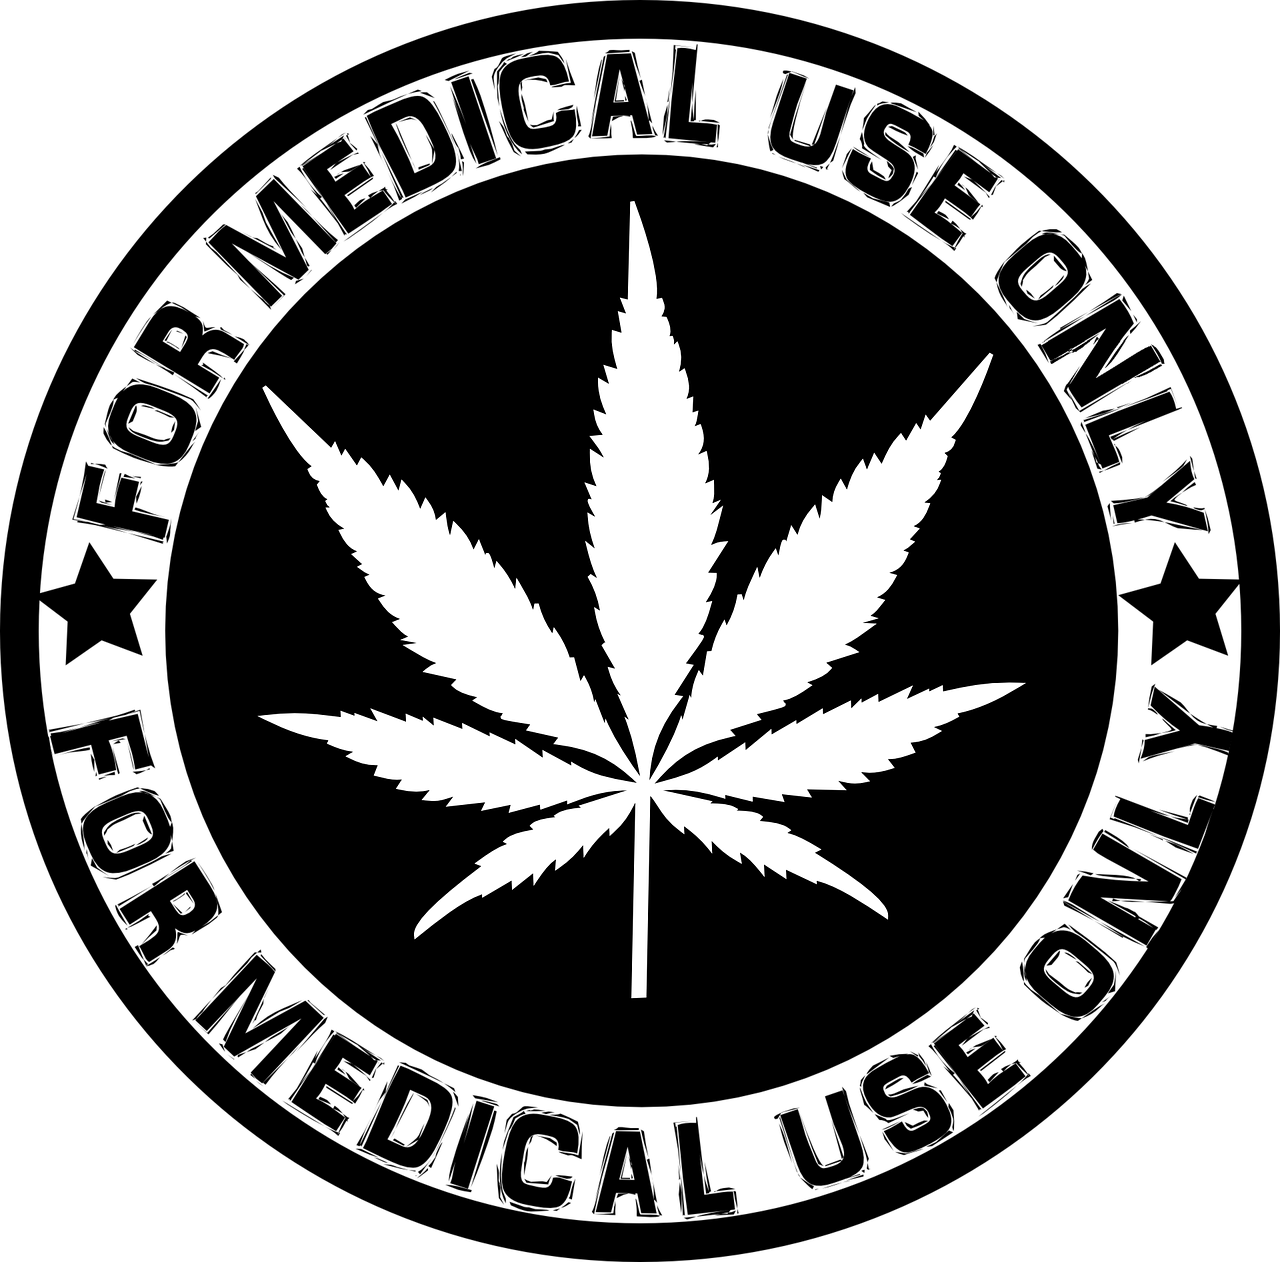 Cannabis Culture - Cannabis in Contemporary Art and Photography